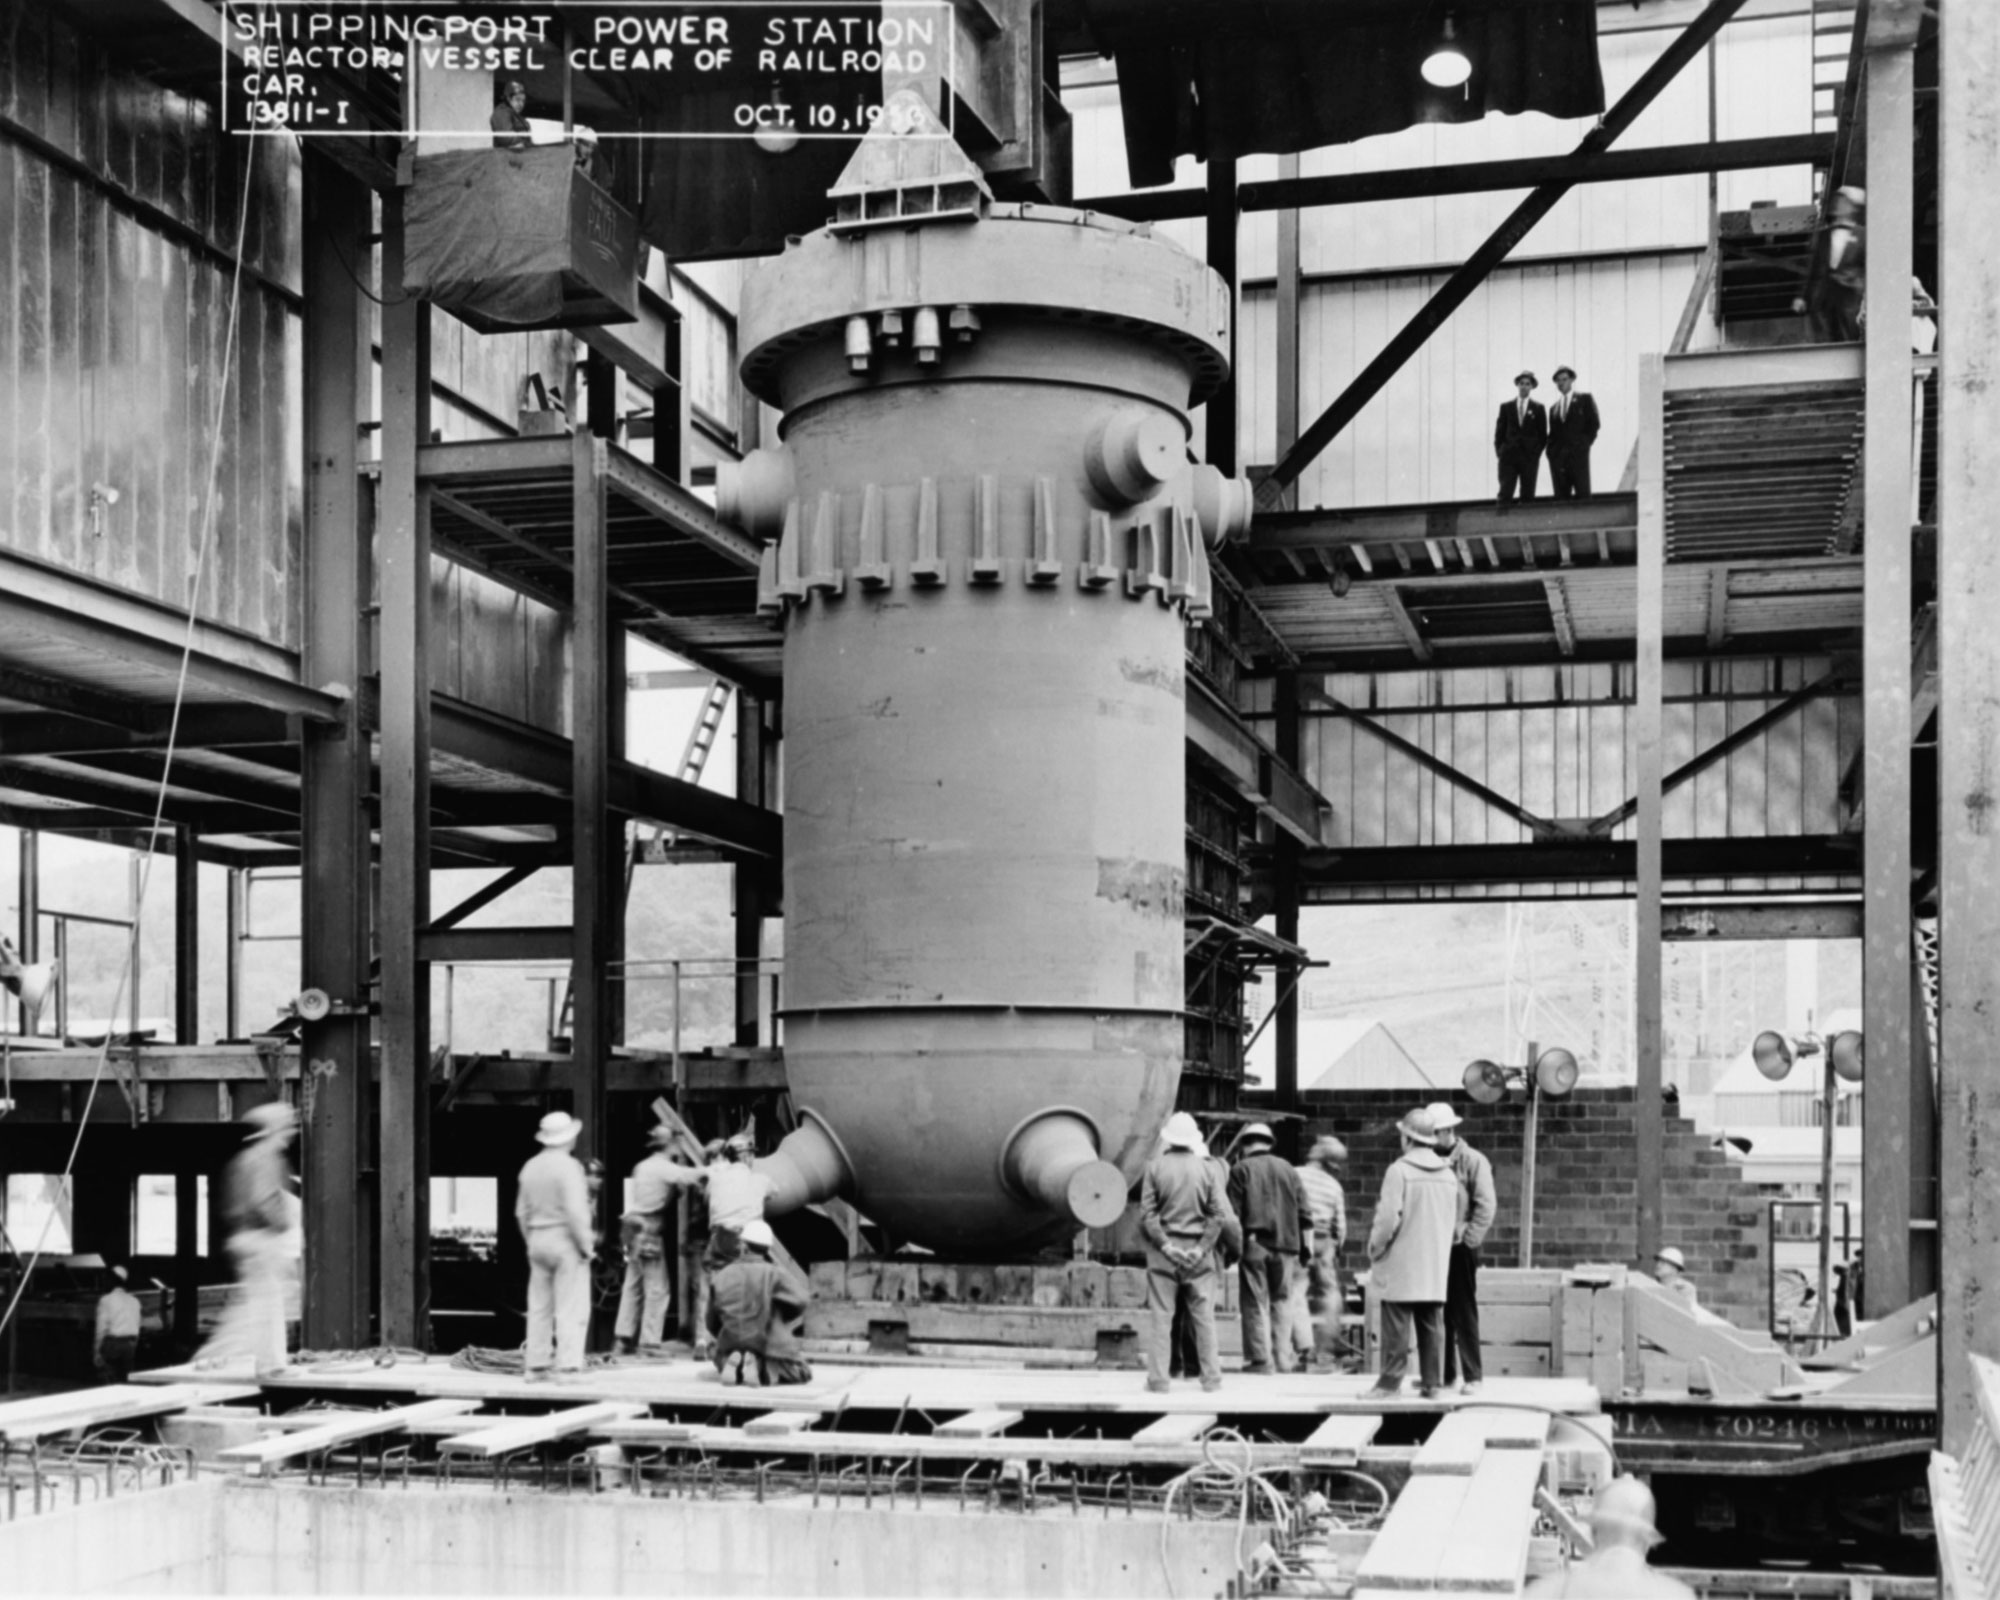 Black and white photograph of a reactor vessel for the Shippingport Atomic Power Station in 1956. The photo shows a tall cylindrical vessel sitting on a wooden pallet. A group of men stand around the base of the vessel. A platform partially wraps around the top of the vessel, and there are two men standing on it looking down.